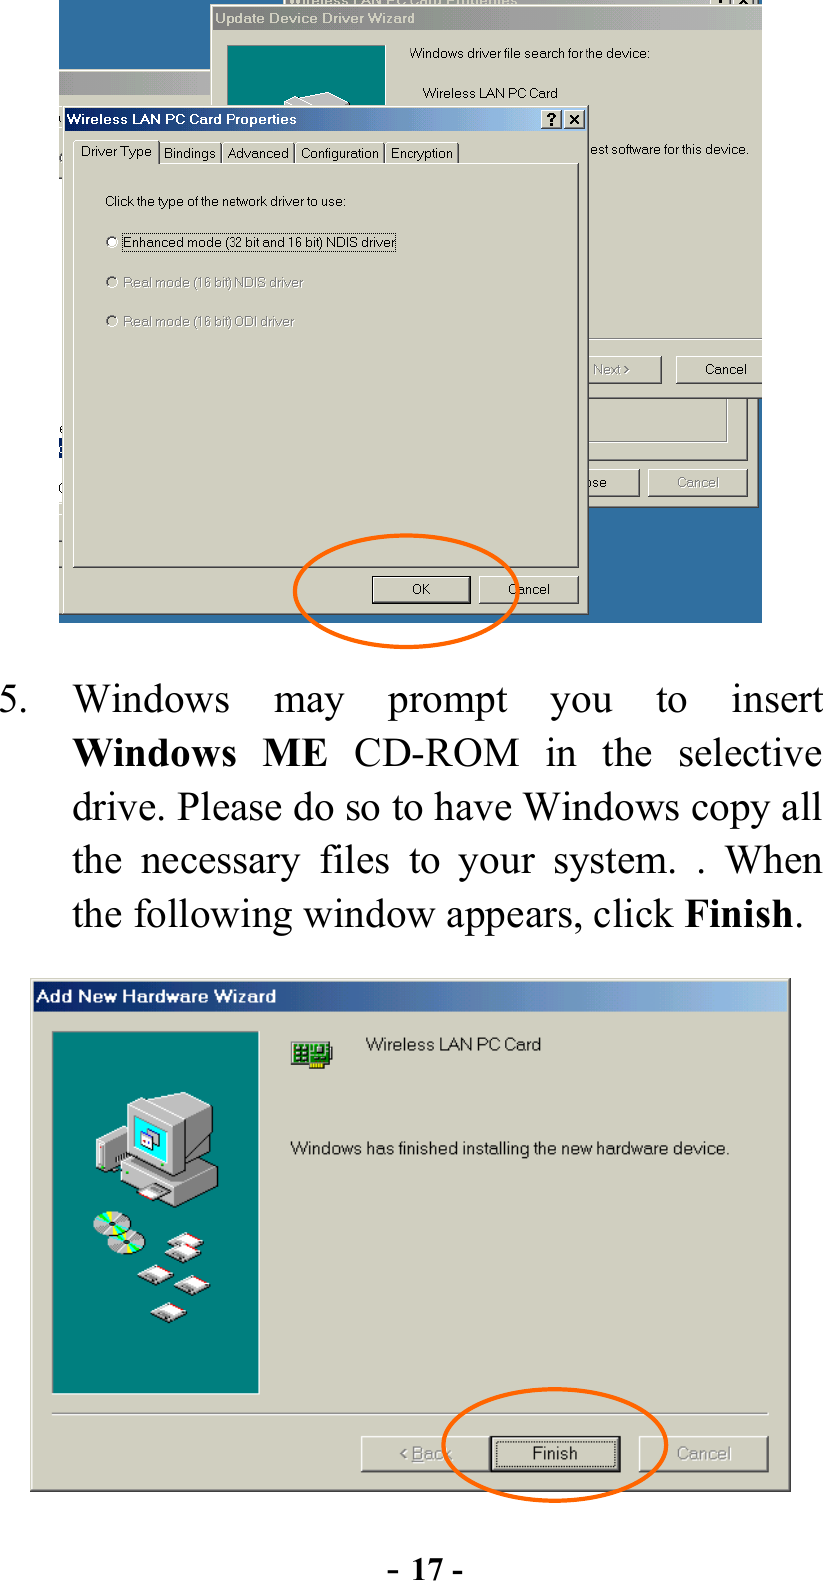  - 17 -  5. Windows may prompt you to insert Windows ME CD-ROM in the selective drive. Please do so to have Windows copy all the necessary files to your system. . When the following window appears, click Finish.   